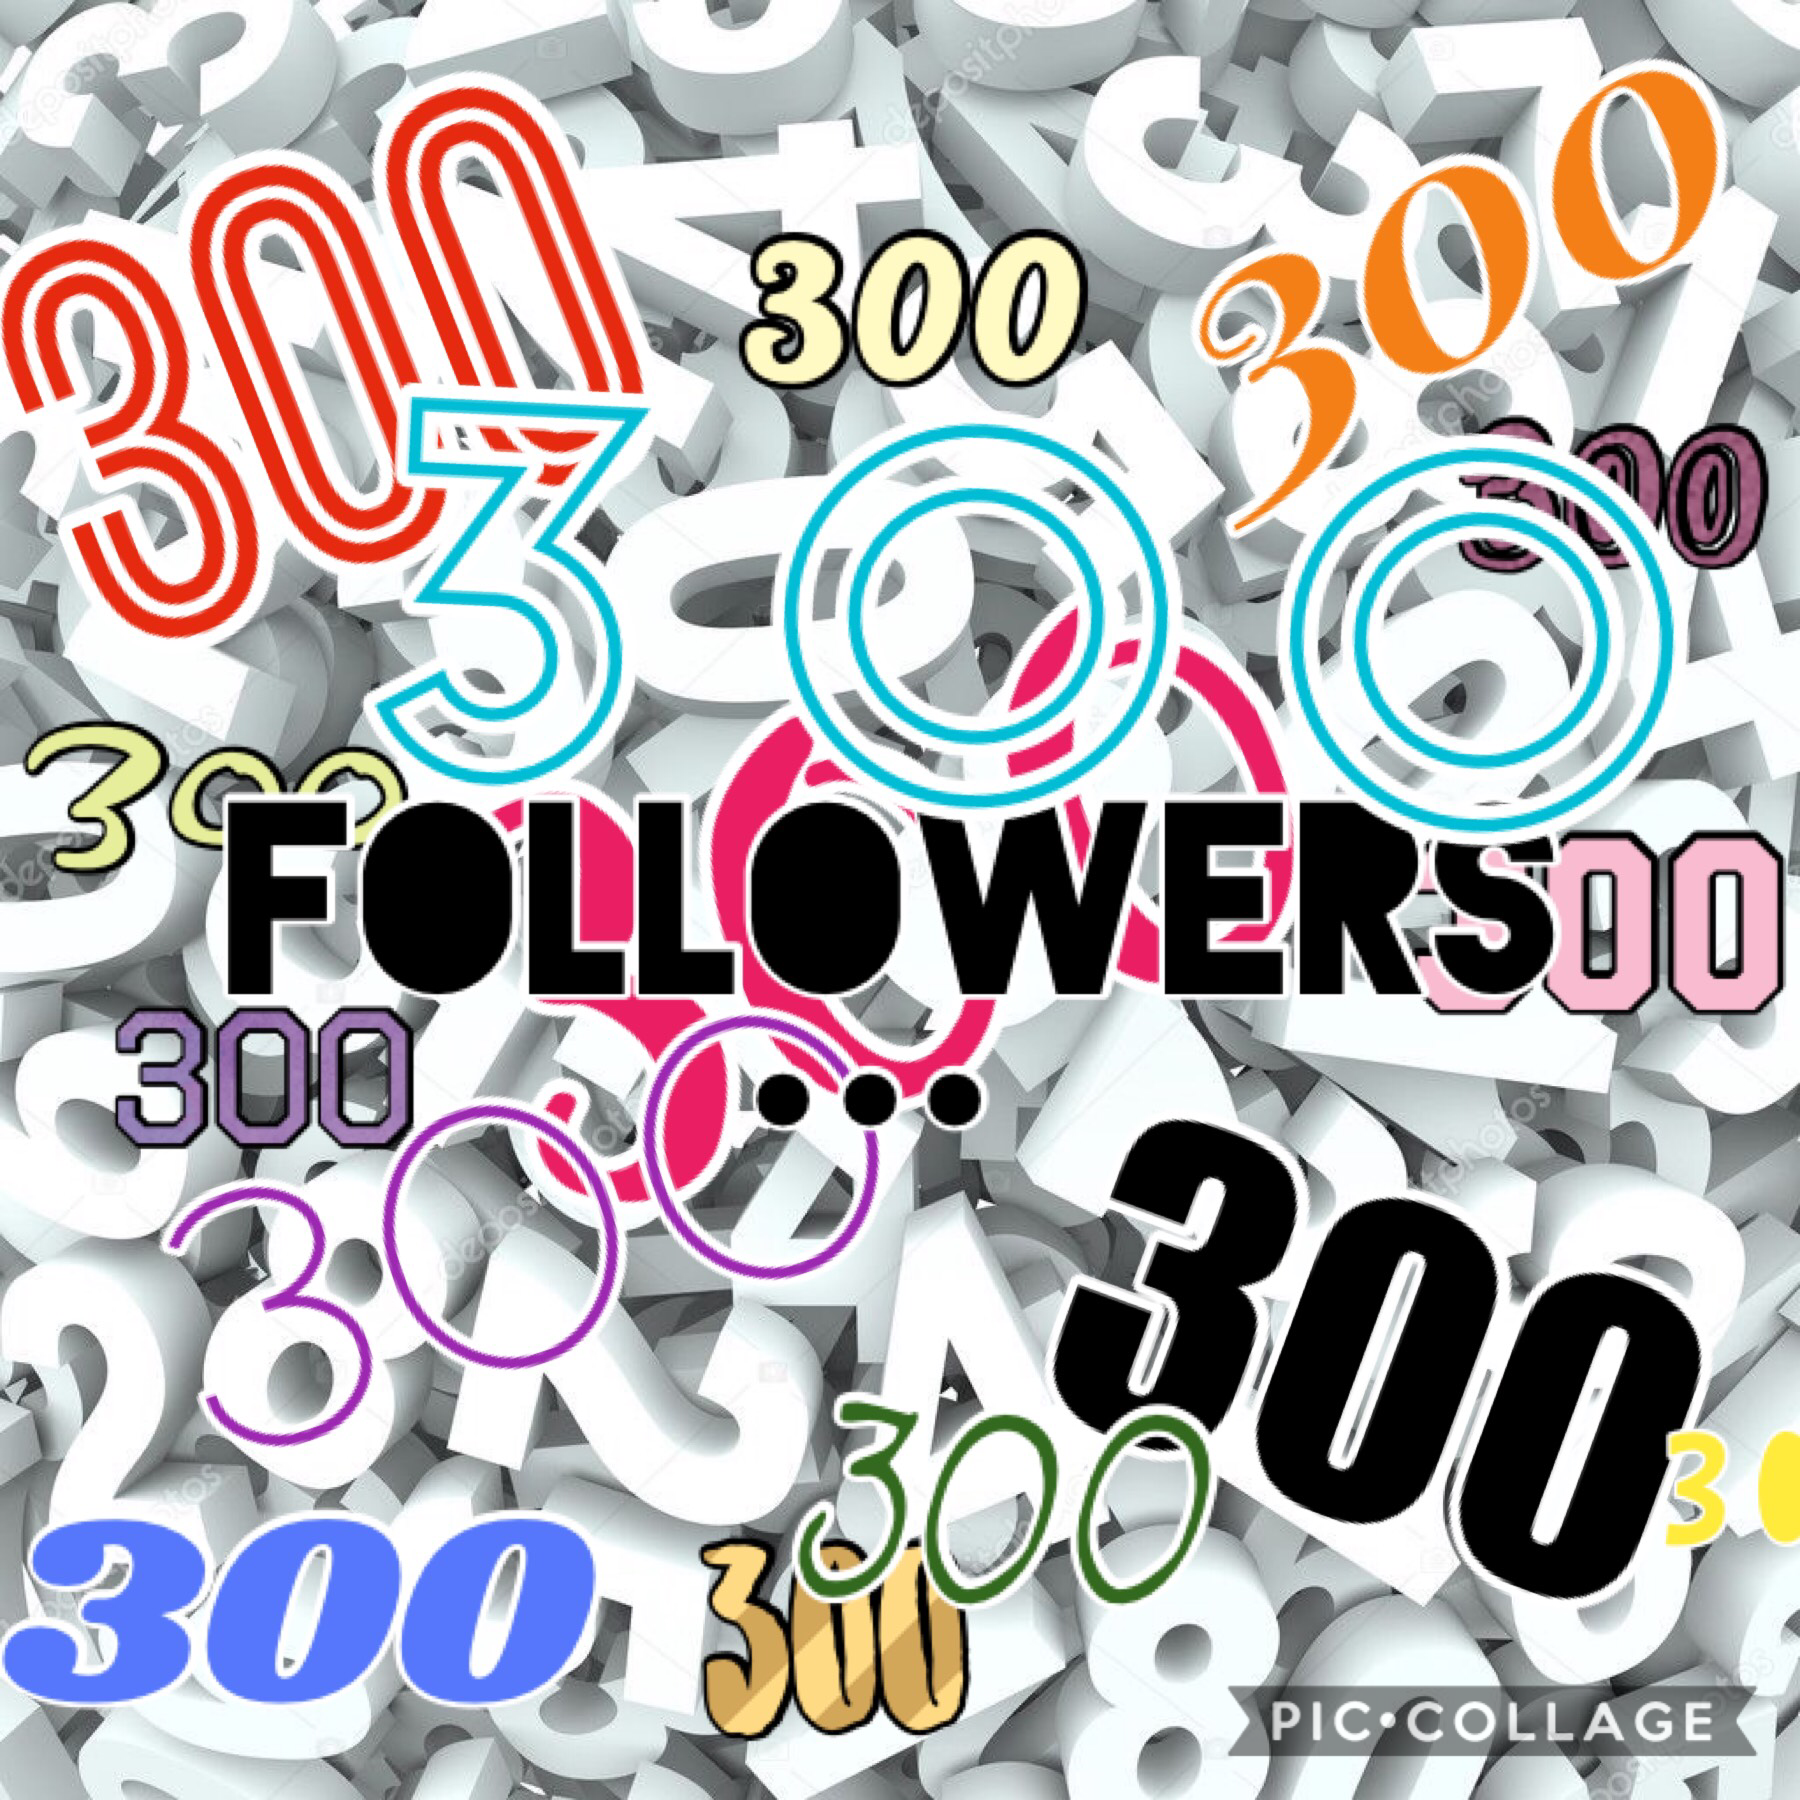 I can’t believe it!! Thanks to all of you I have reached 300 followers! 😄😄